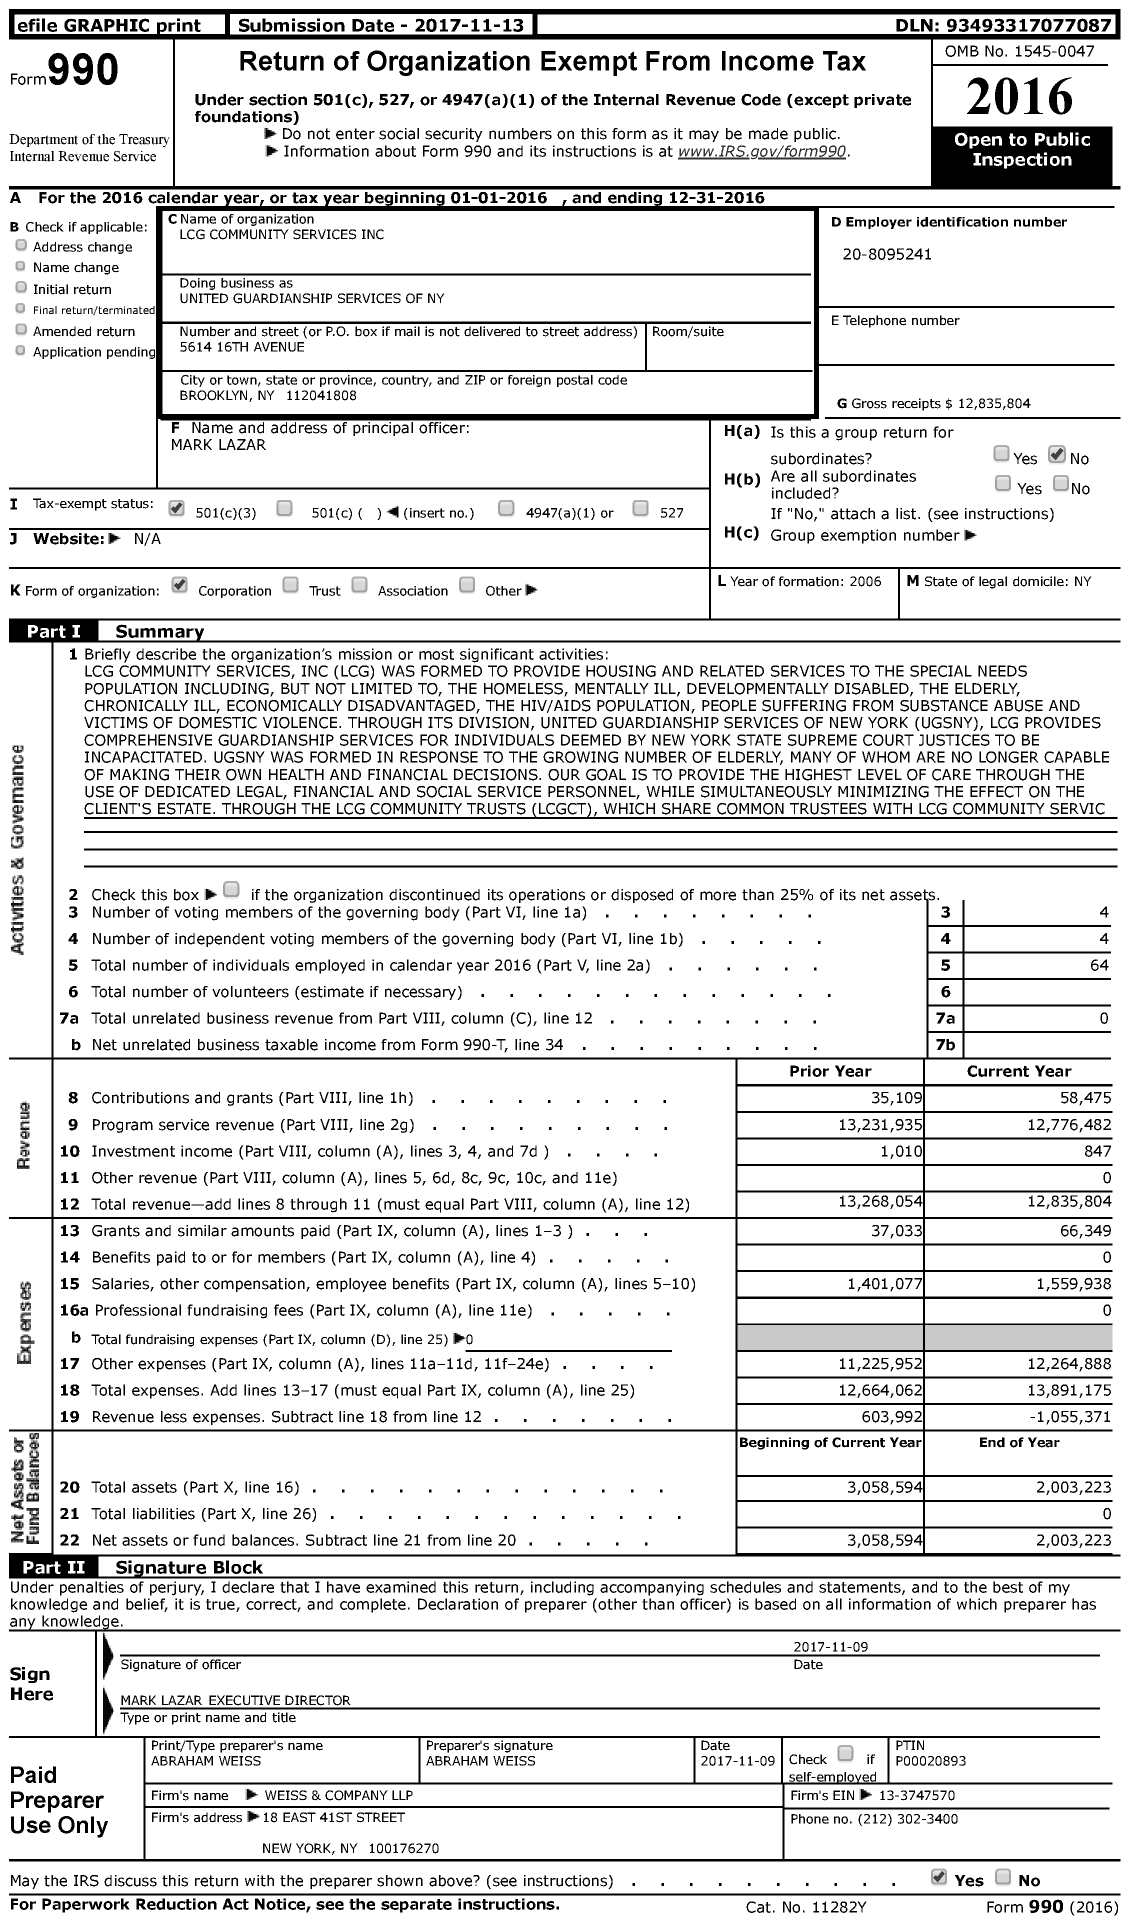 Image of first page of 2016 Form 990 for United Guardianship Services of Ny